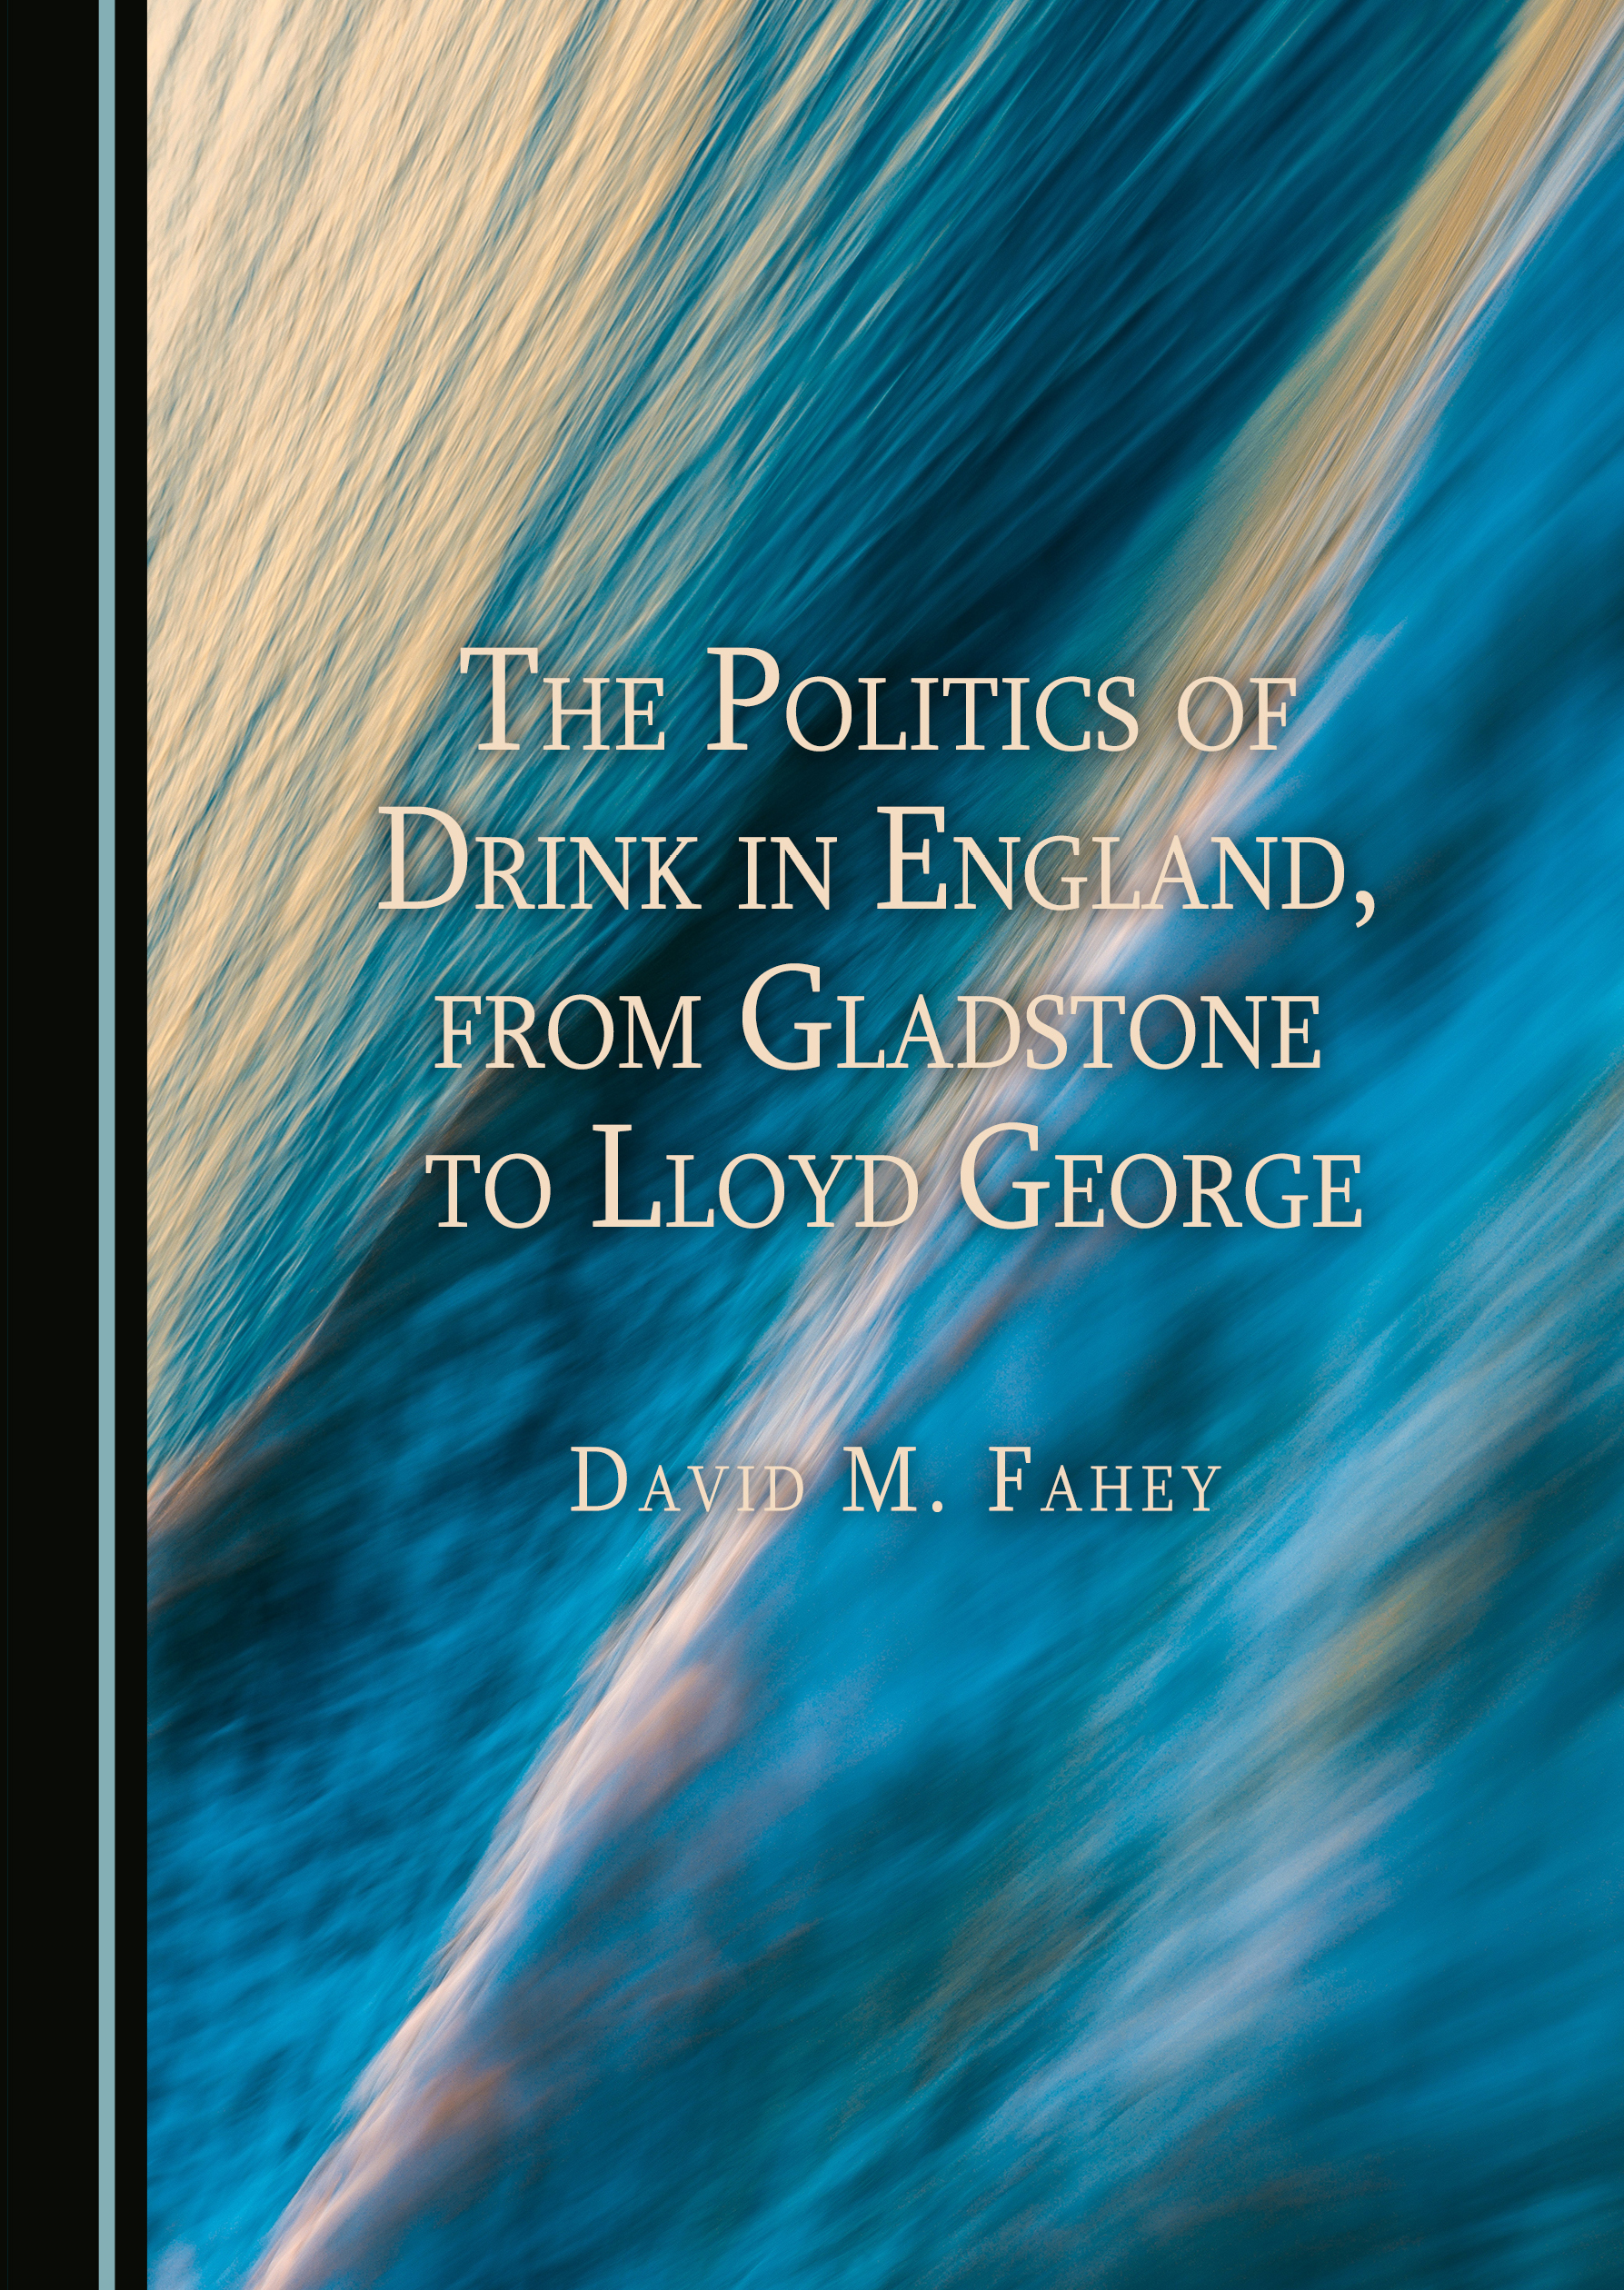 The Politics of Drink in England, from Gladstone to Lloyd George